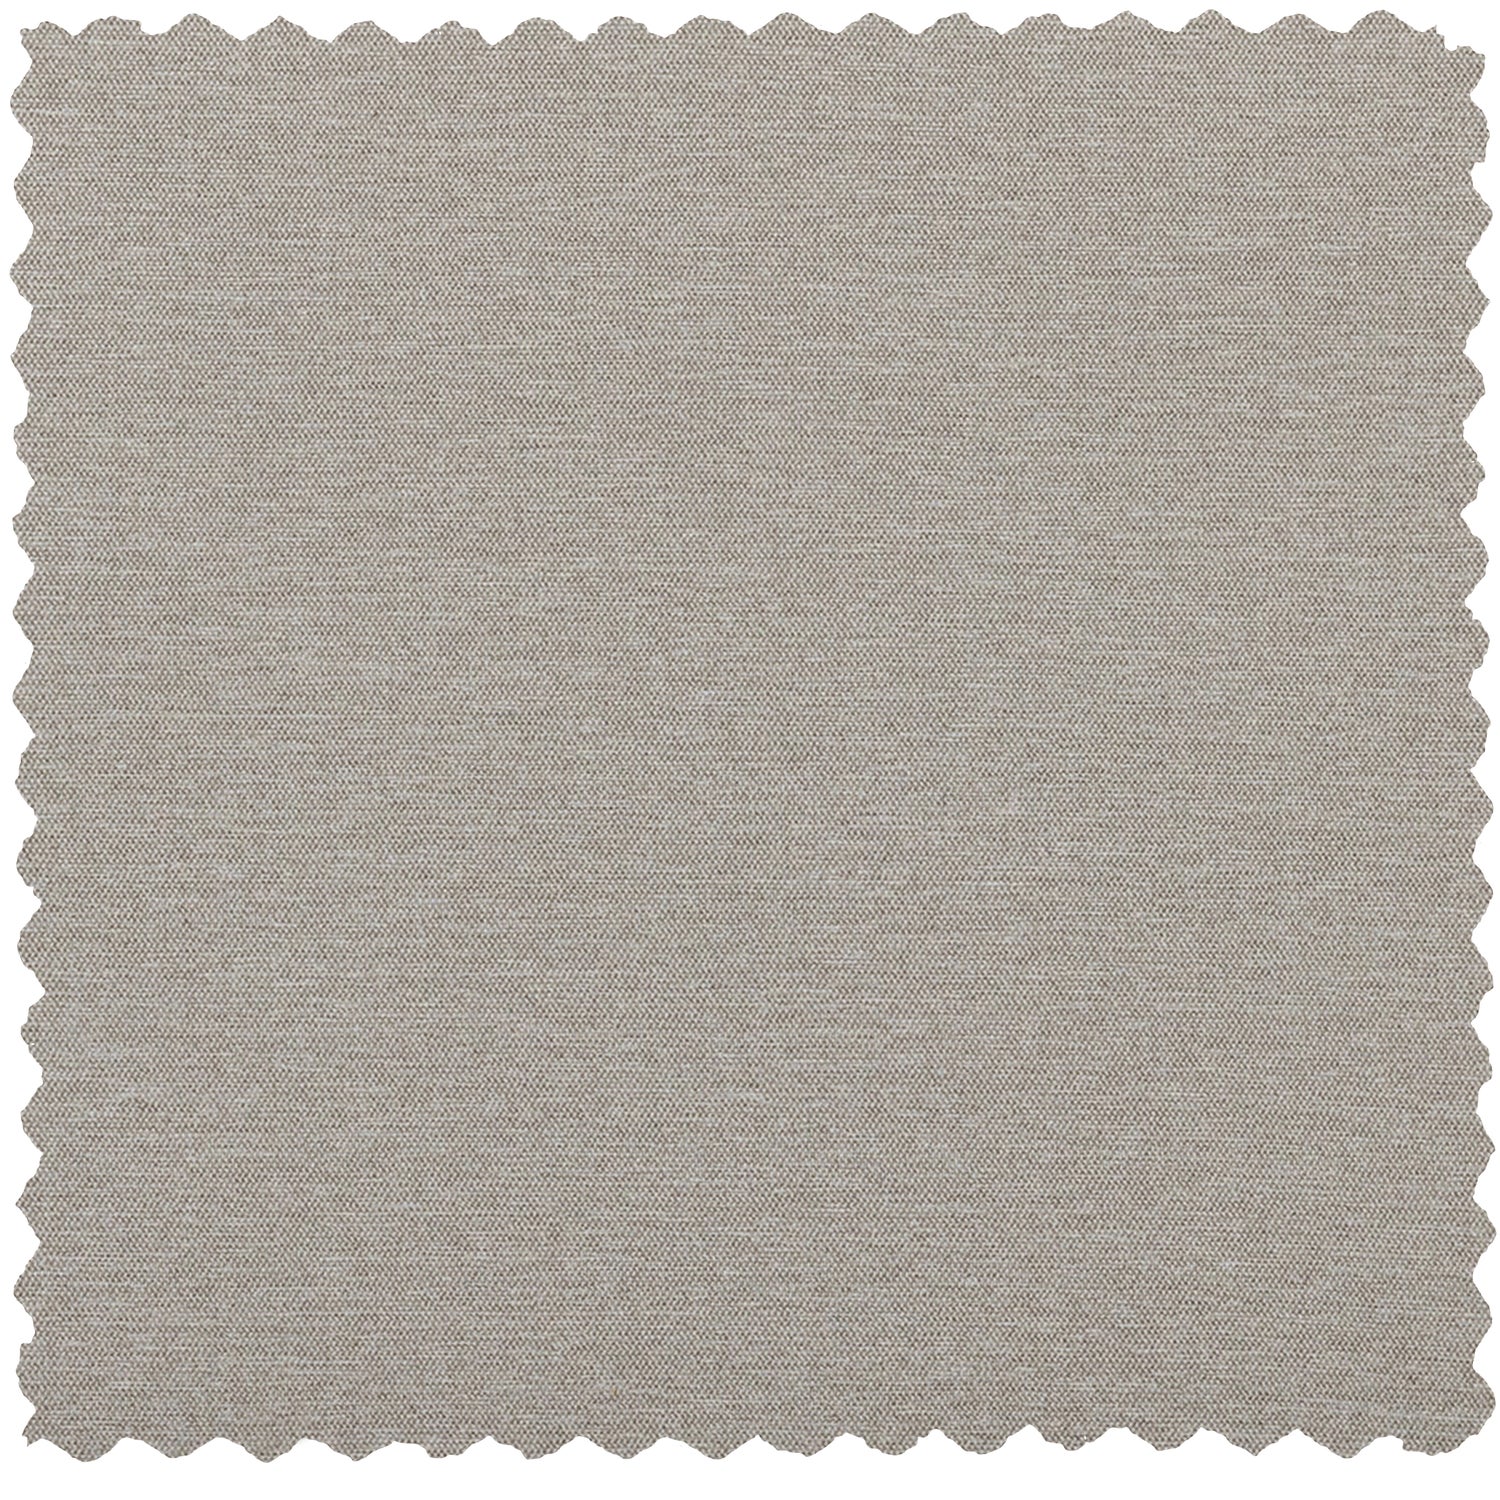 HAVEN_191004_NATURAL_HARBY_WOVEN_FABRIC.jpg?auto=webp&format=png&width=1500&height=1500